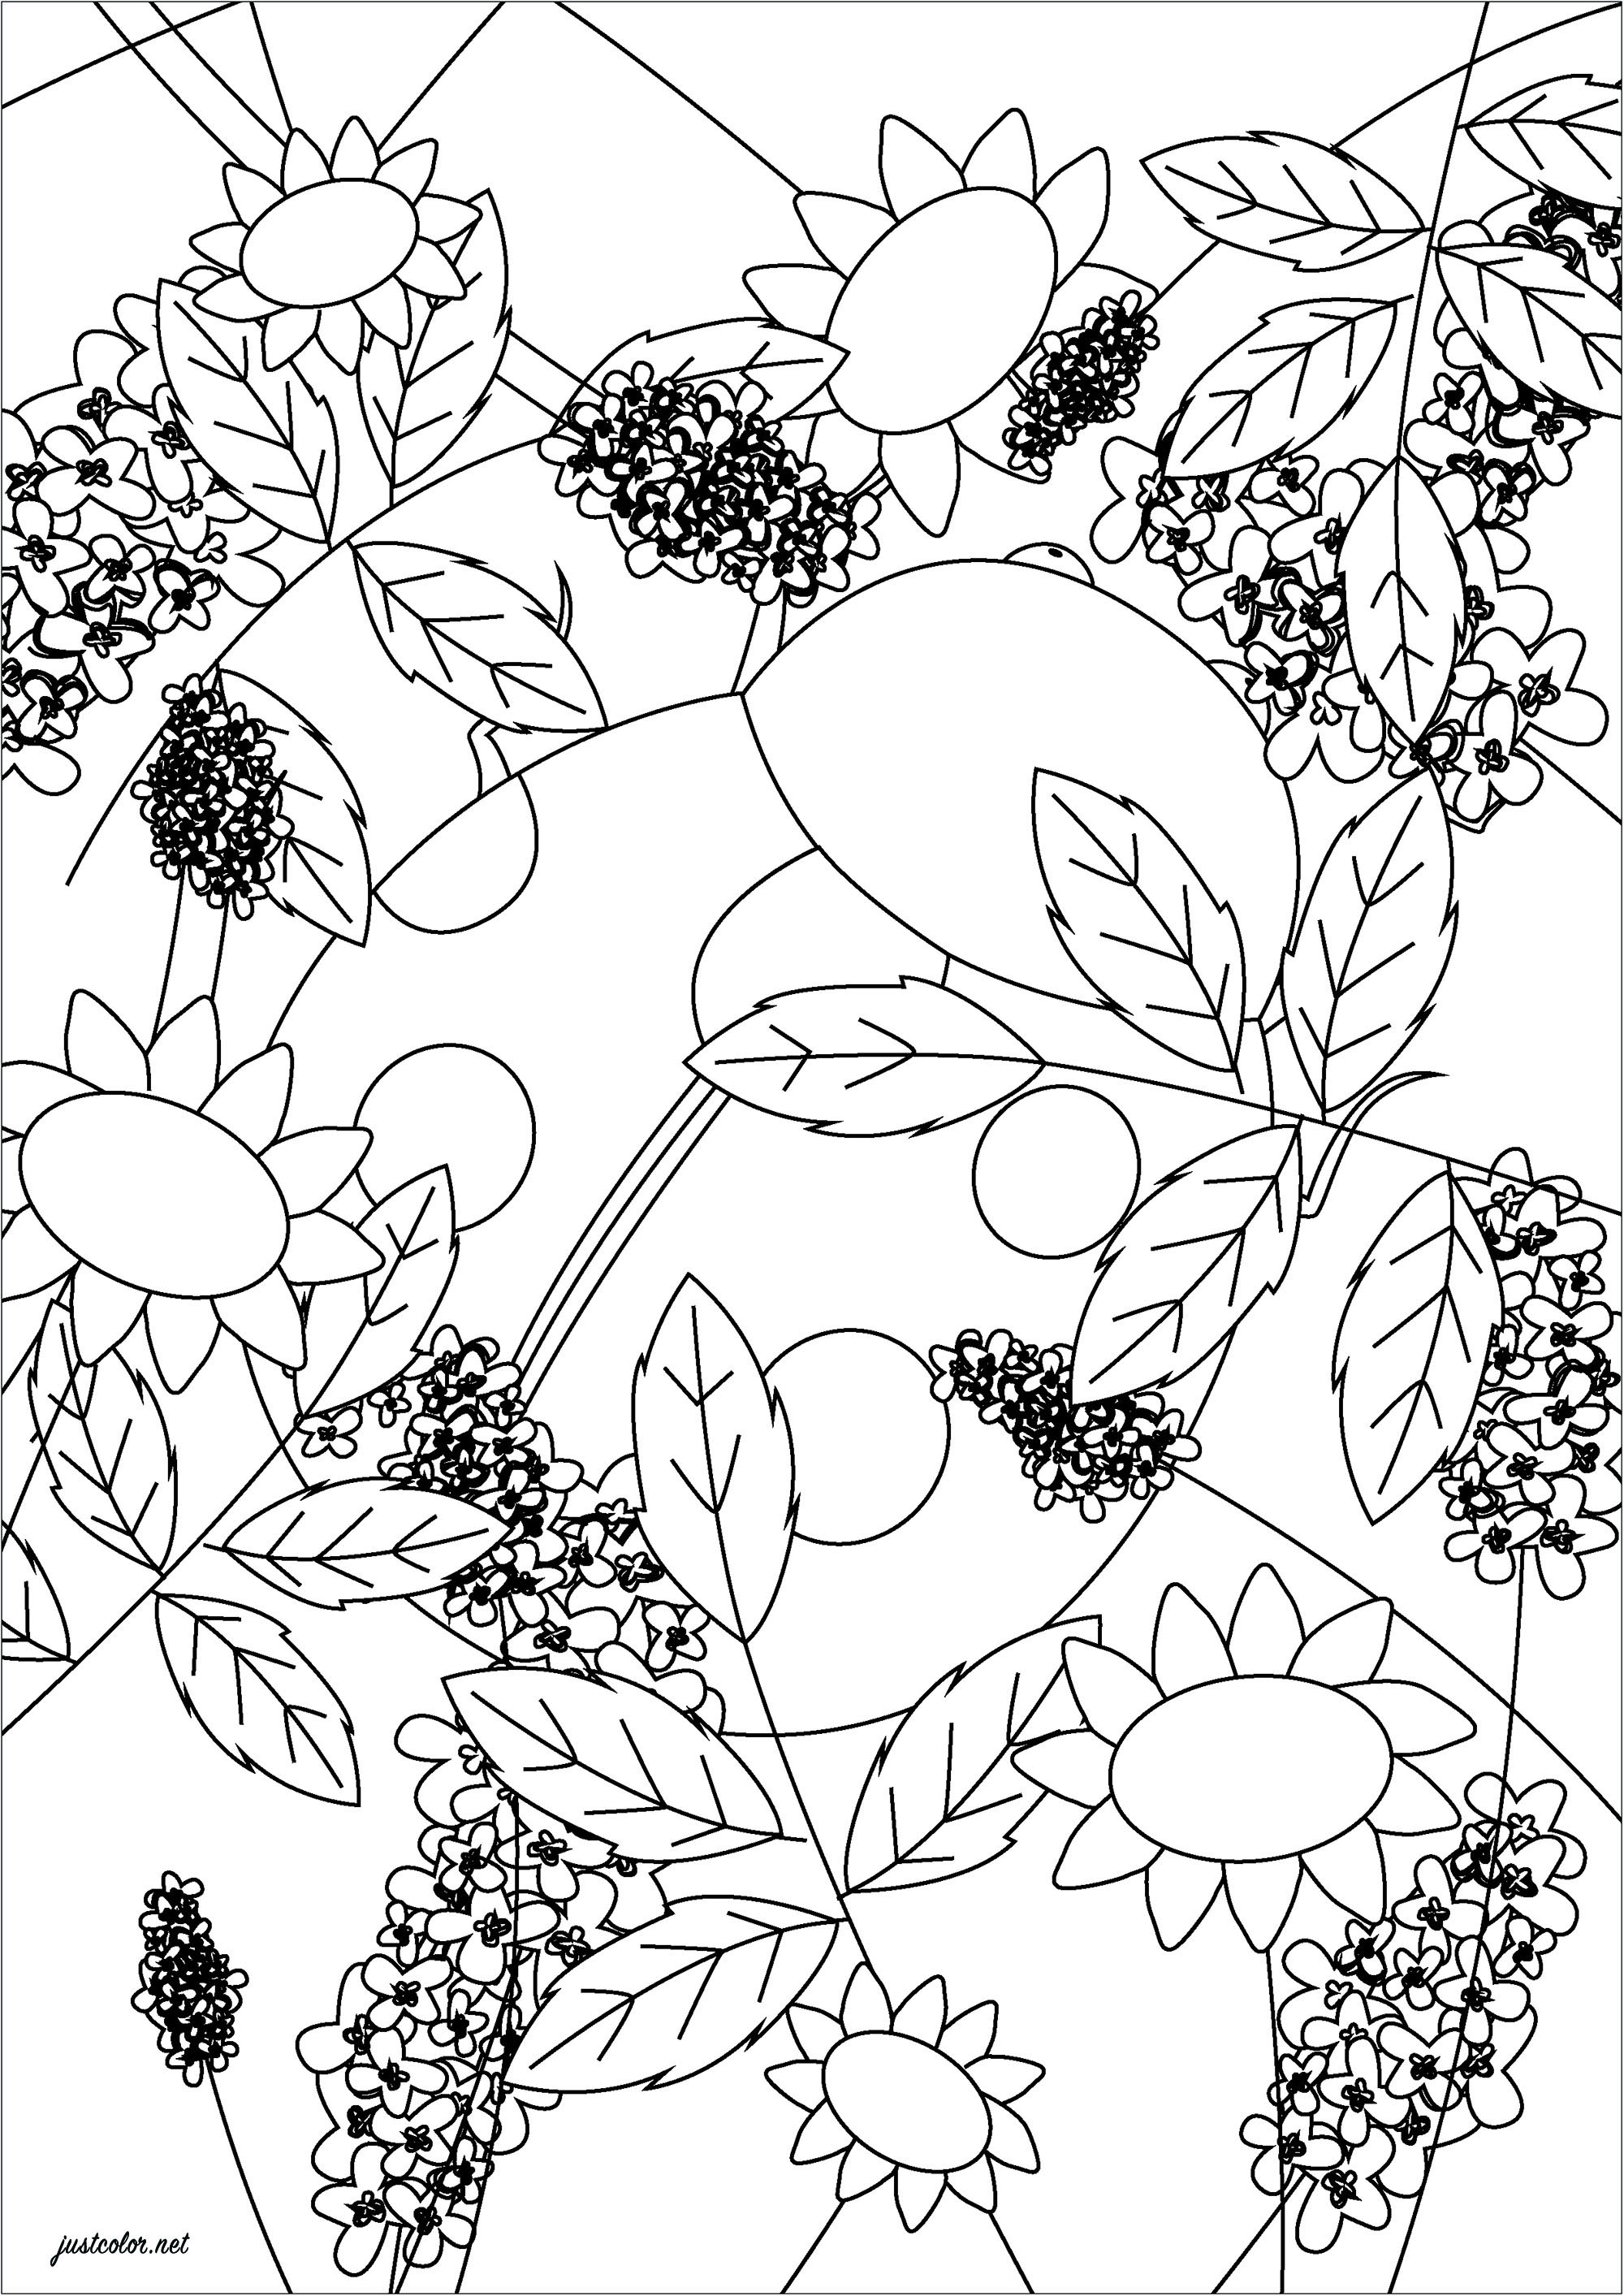 Coloring page of leaves. With beautiful shades of green, these leaves will be even prettier